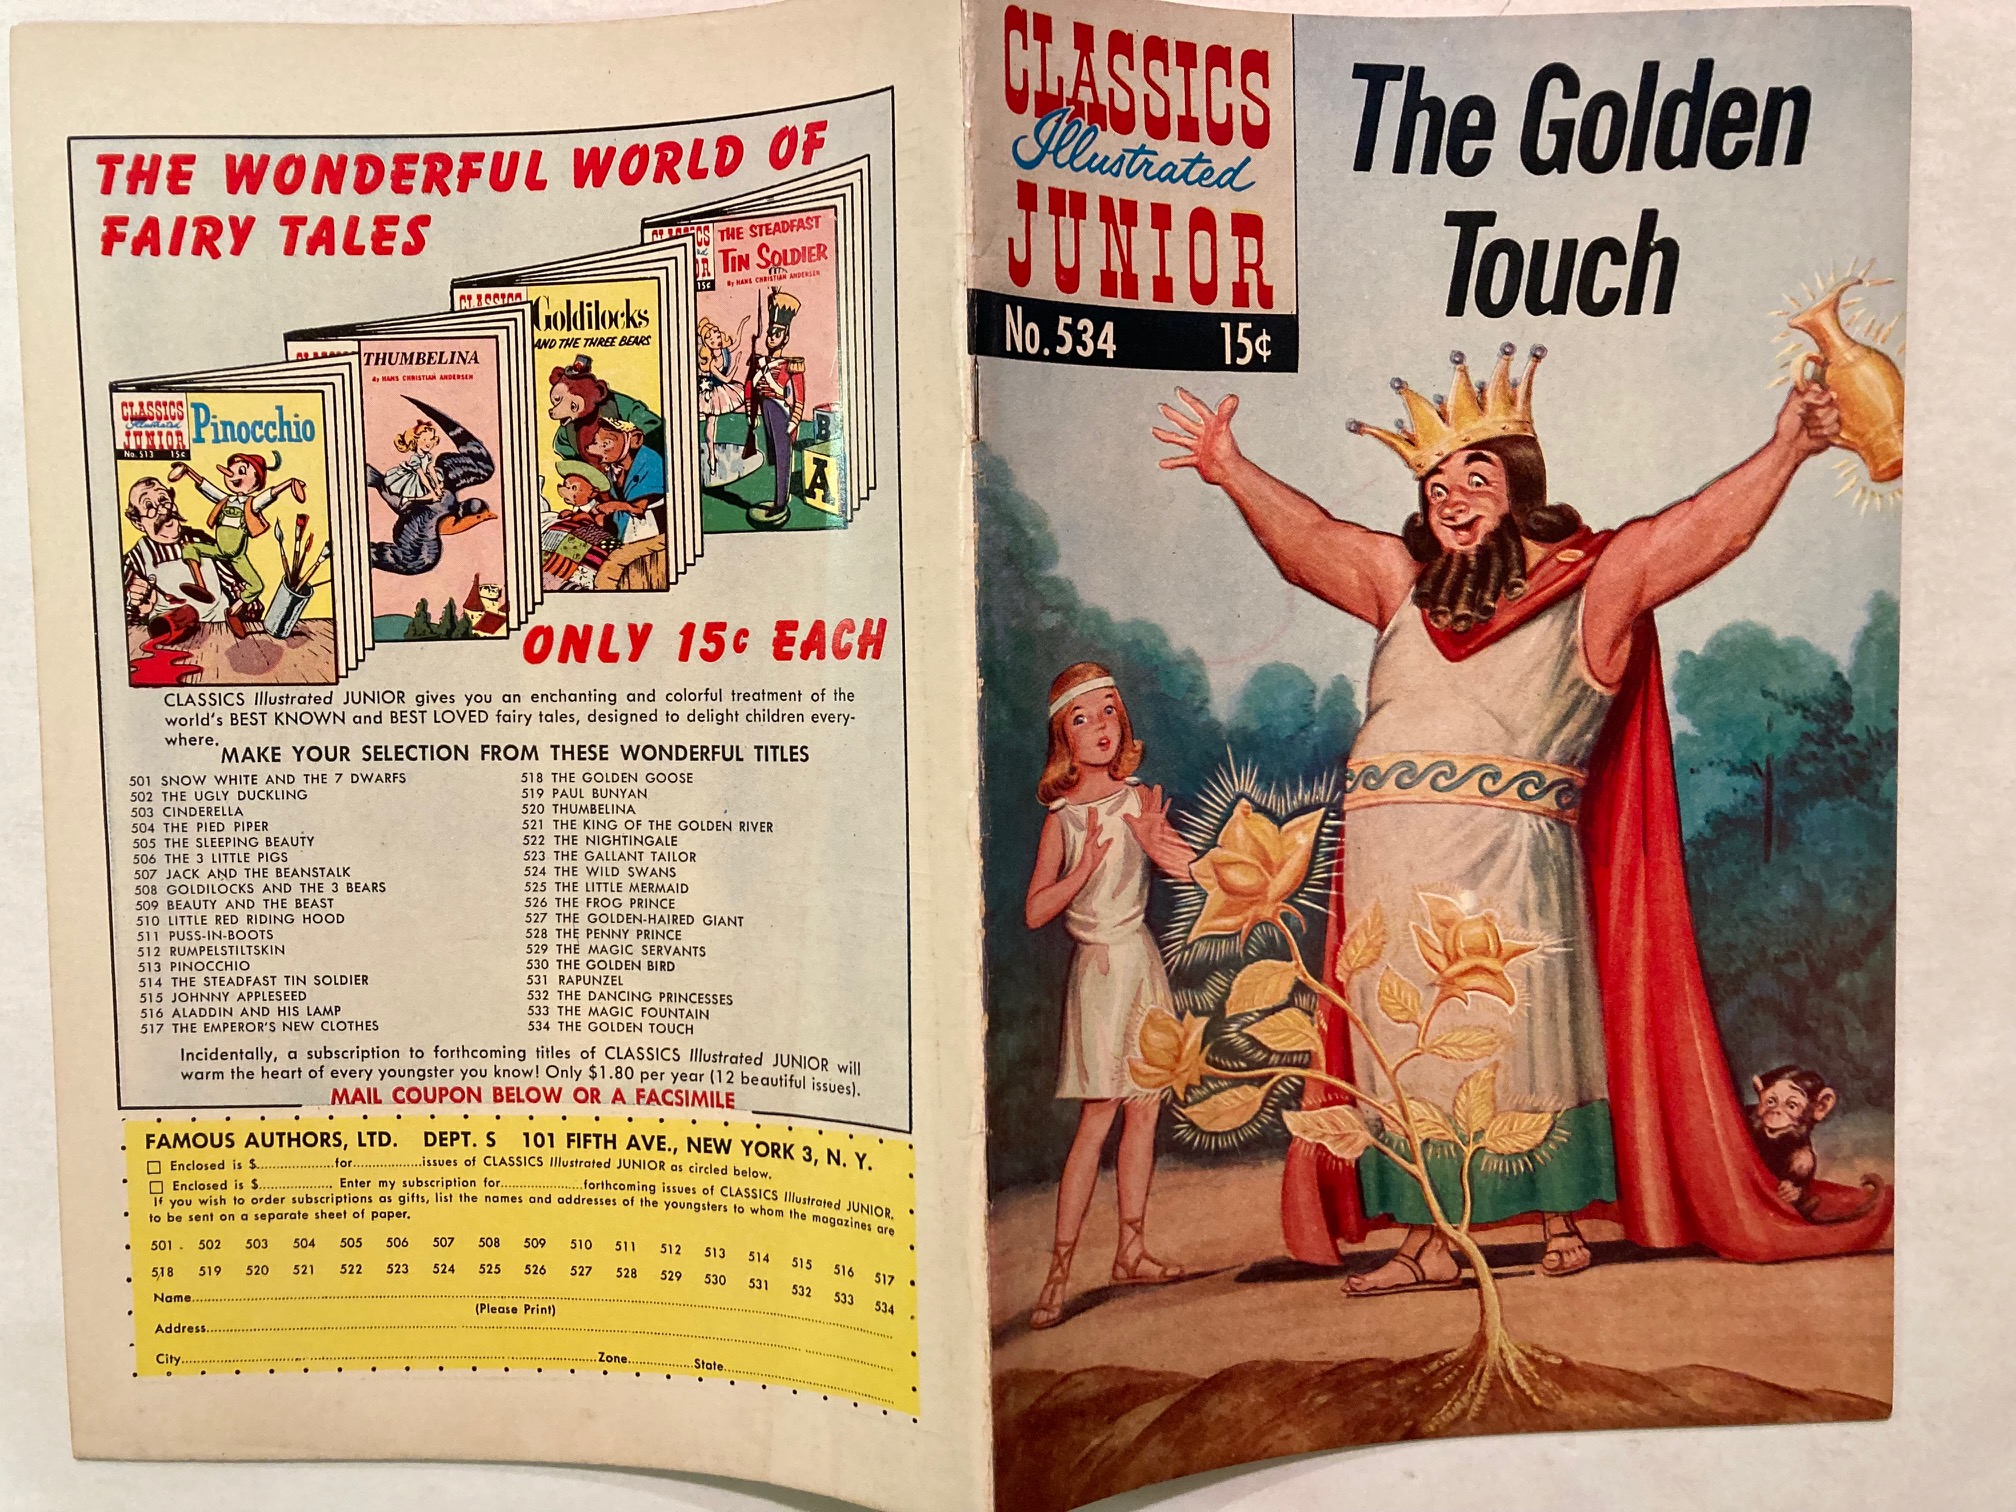 King Midas and the Golden Touch - The #1 Best Online Bookstore - Genuine  Stock - COD